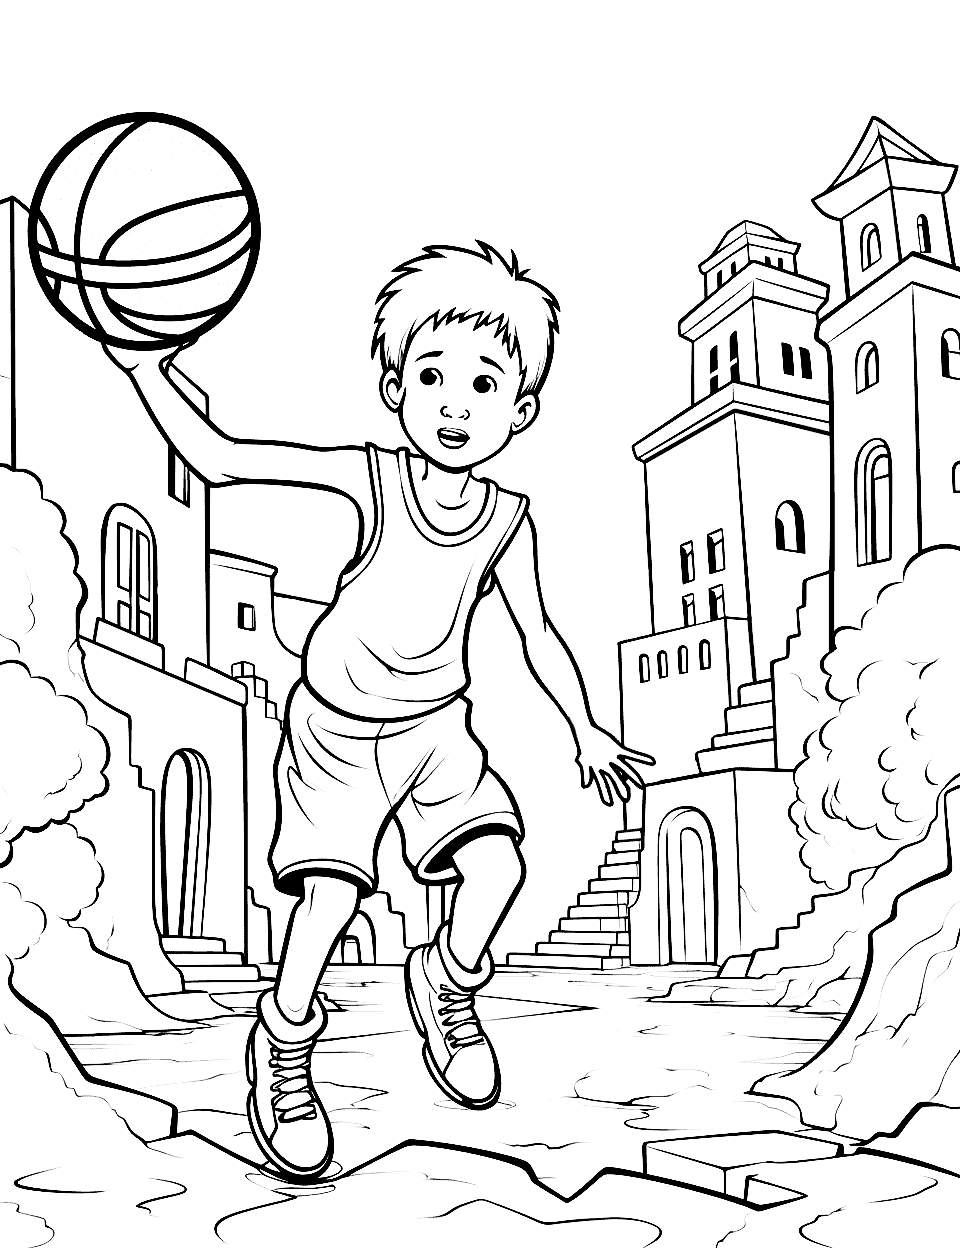 Lost City of Gold Game Basketball Coloring Page - A scene of a kid playing basketball in a mythical lost city of gold.